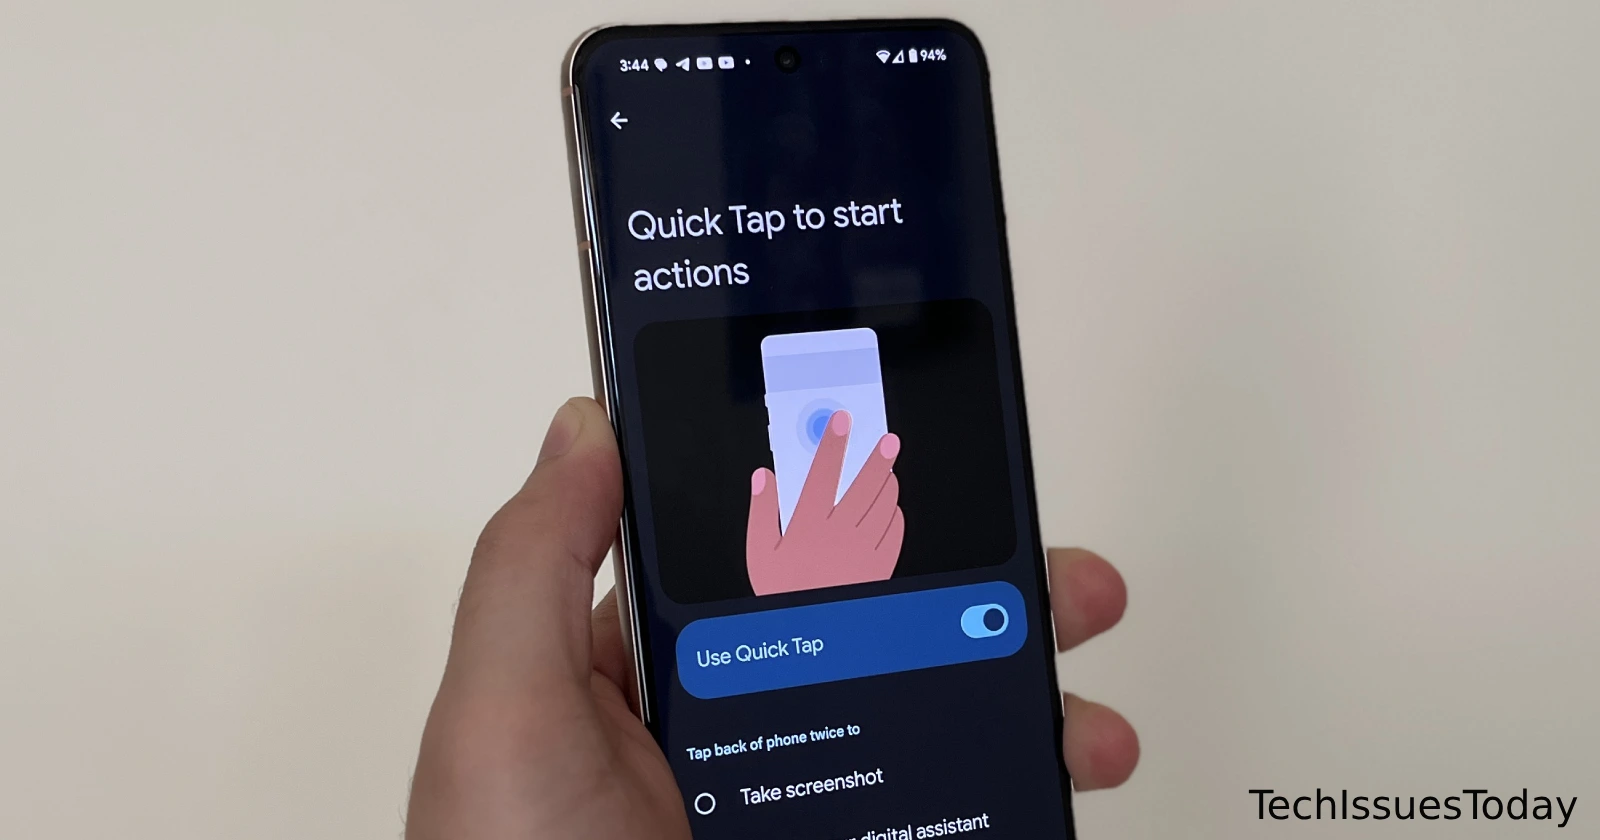 Google Pixel 'Quick Tap' gesture not accurate? Here are some tips to get it to work flawlessly